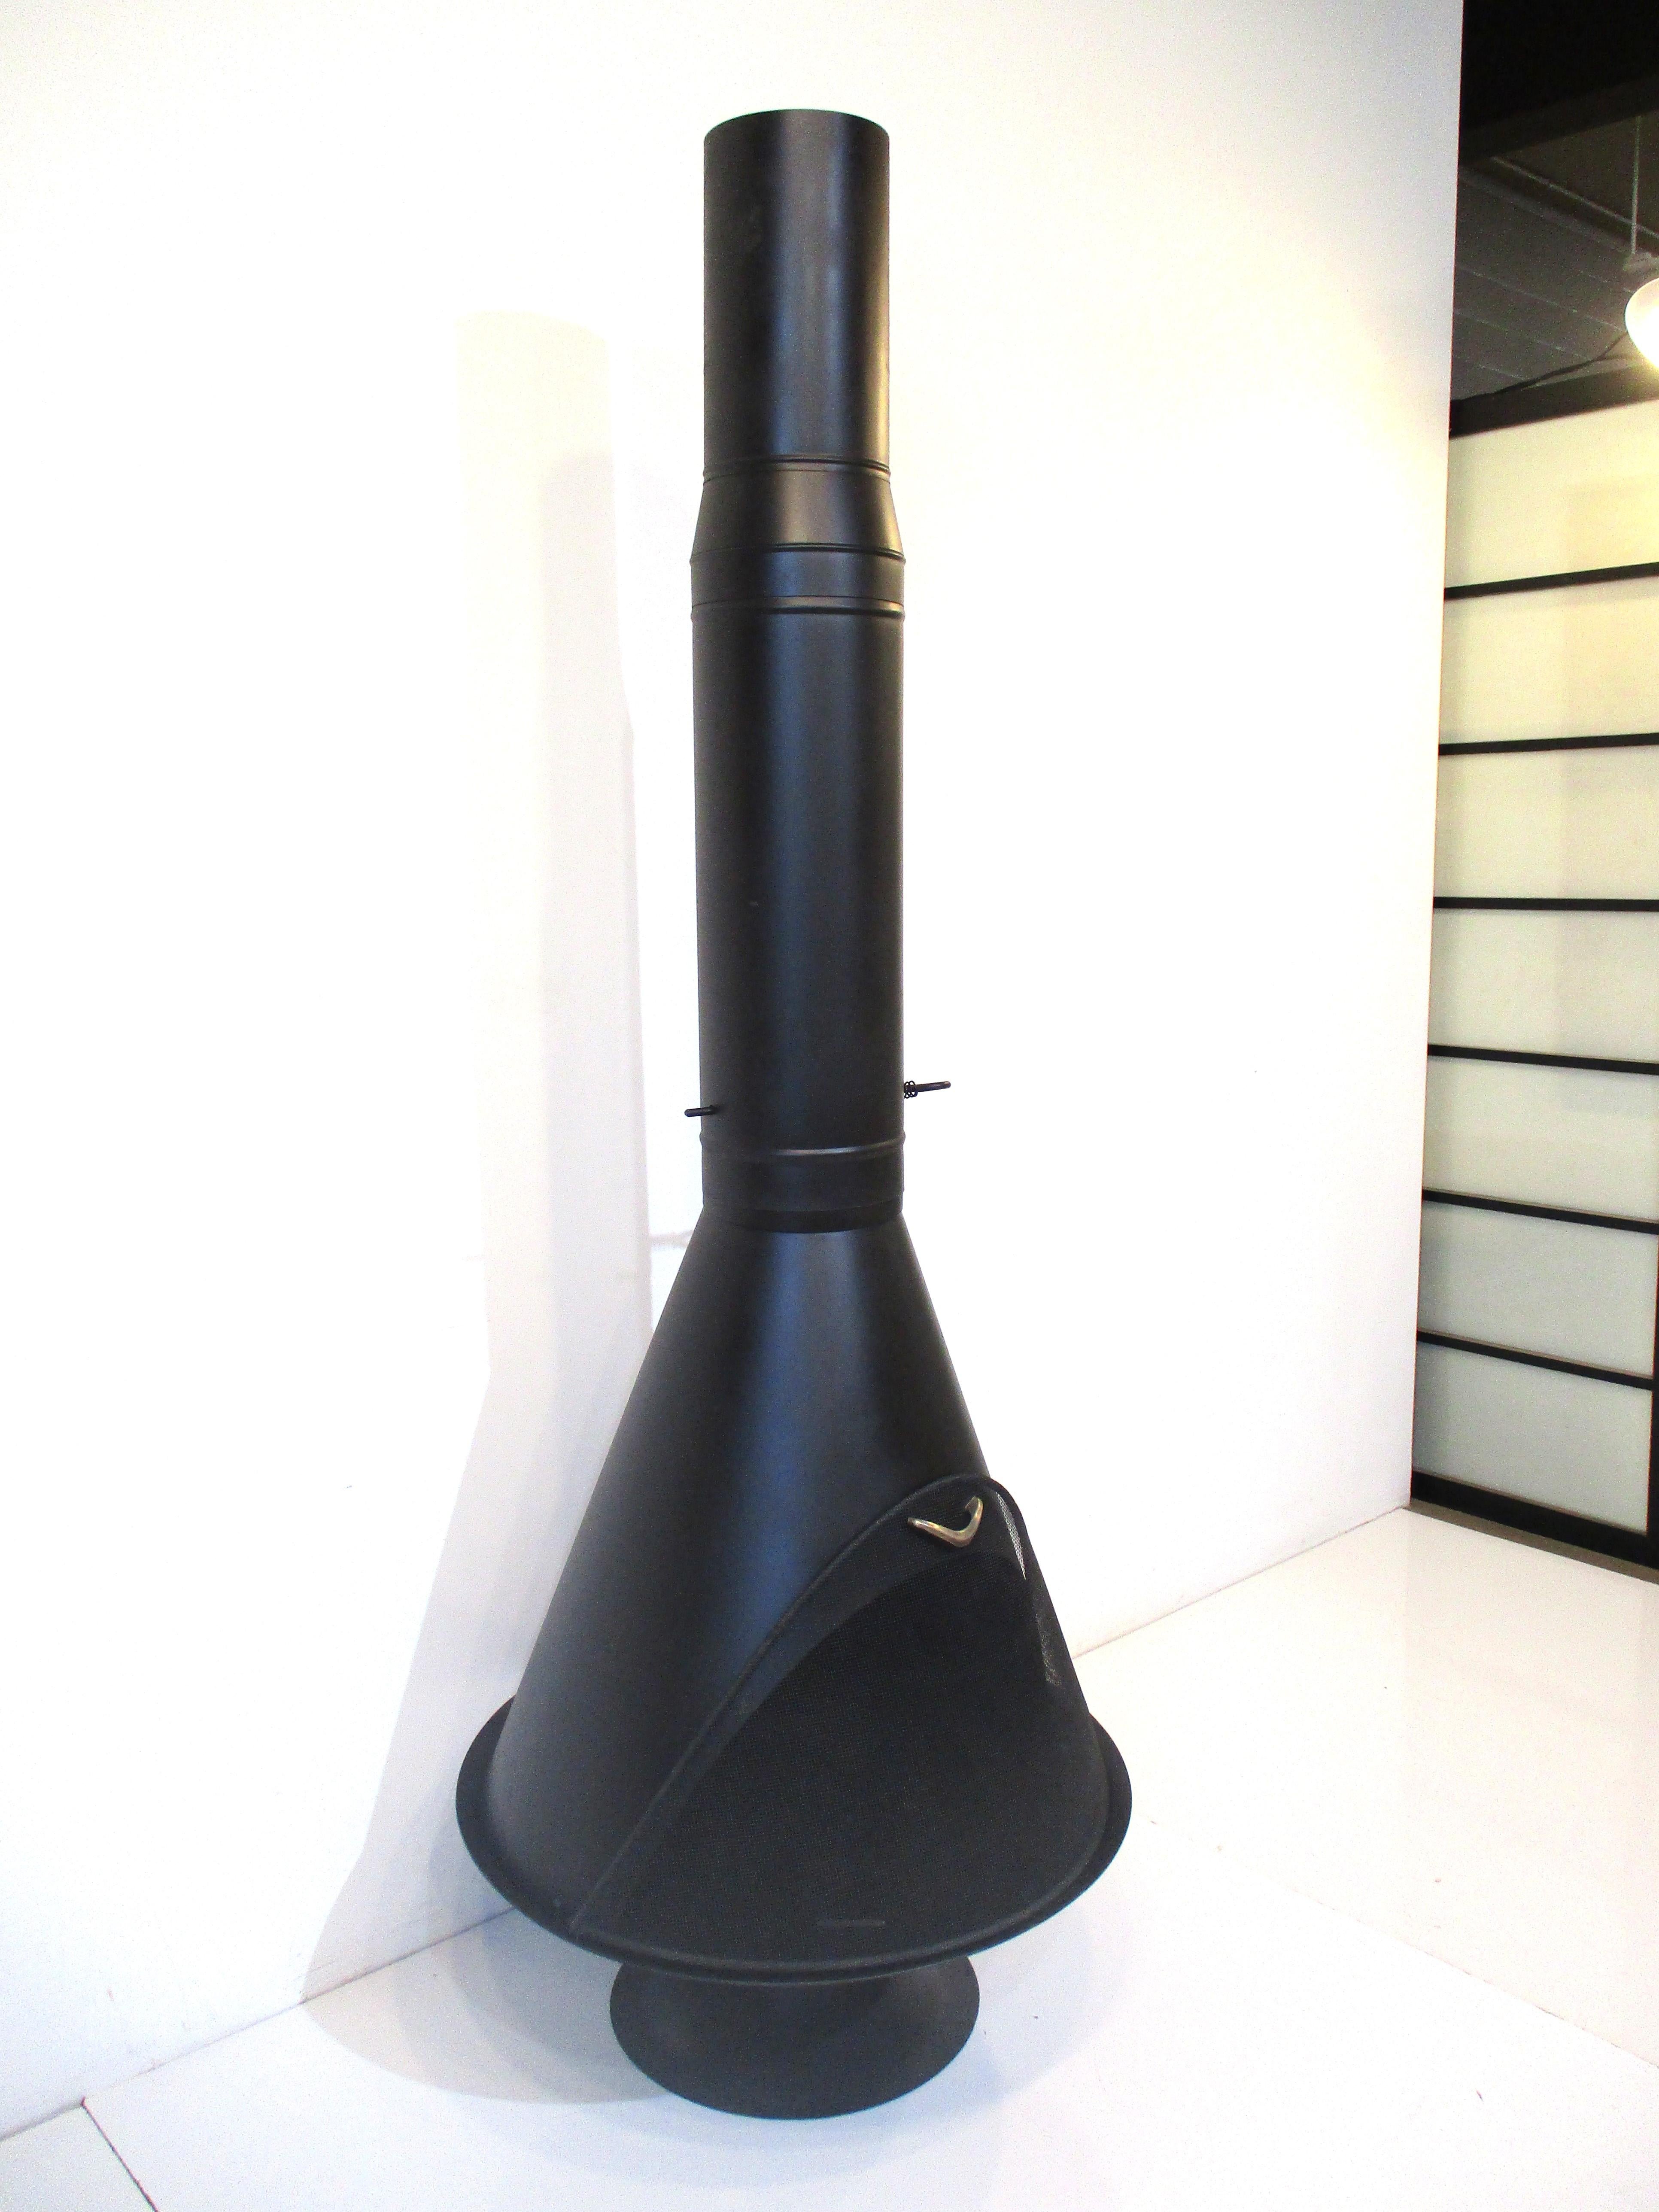 A vintage mid-century steel cone shaped standing fireplace with the original formed screen and handle. Repainted with satin black heat resistant paint to the body and coming in two pieces one the fireplace and the other the stack with an adjustable